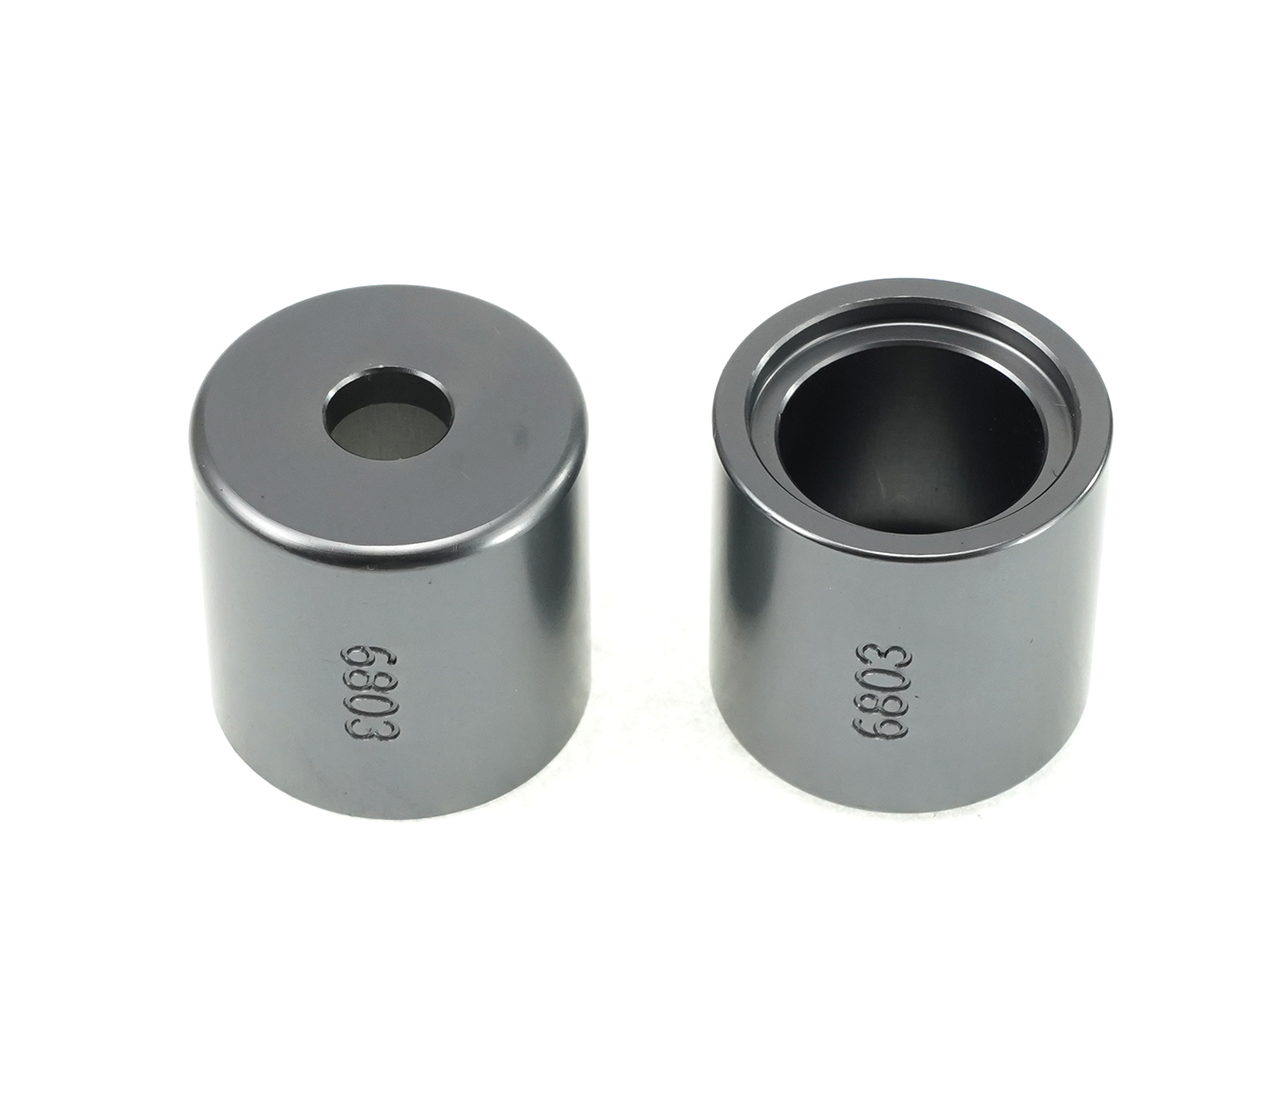 Enduro HT 6803 Outer - Outer Bearing Guide for Bearing Press (BRT-005 or BRT-050) - single guide only